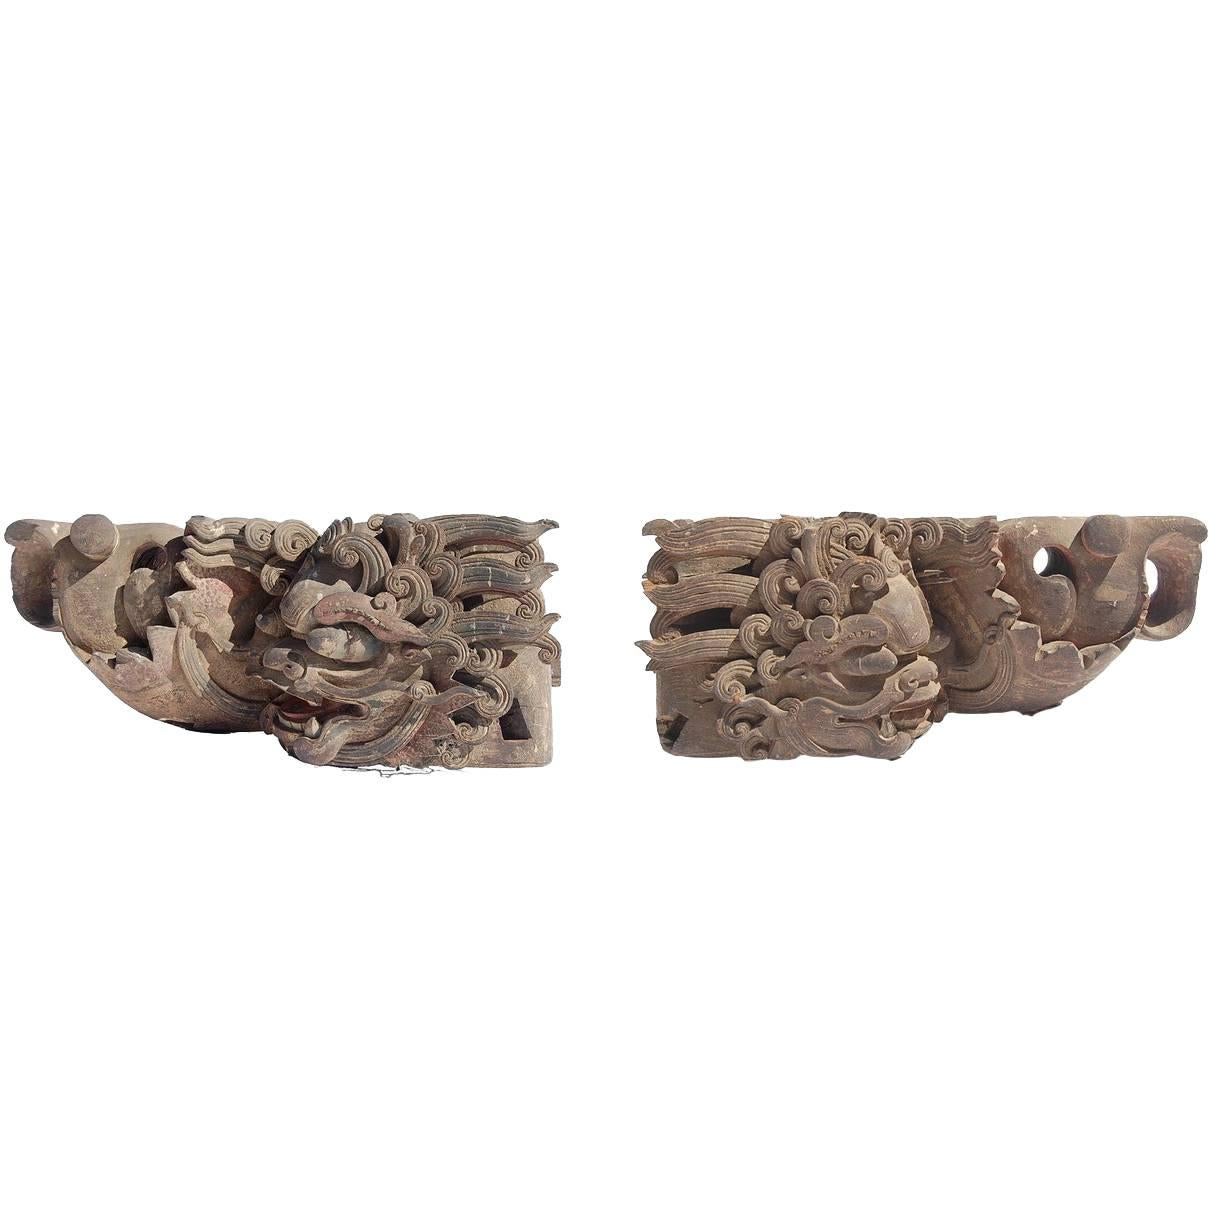 Pair of Balinese Architectural Elements